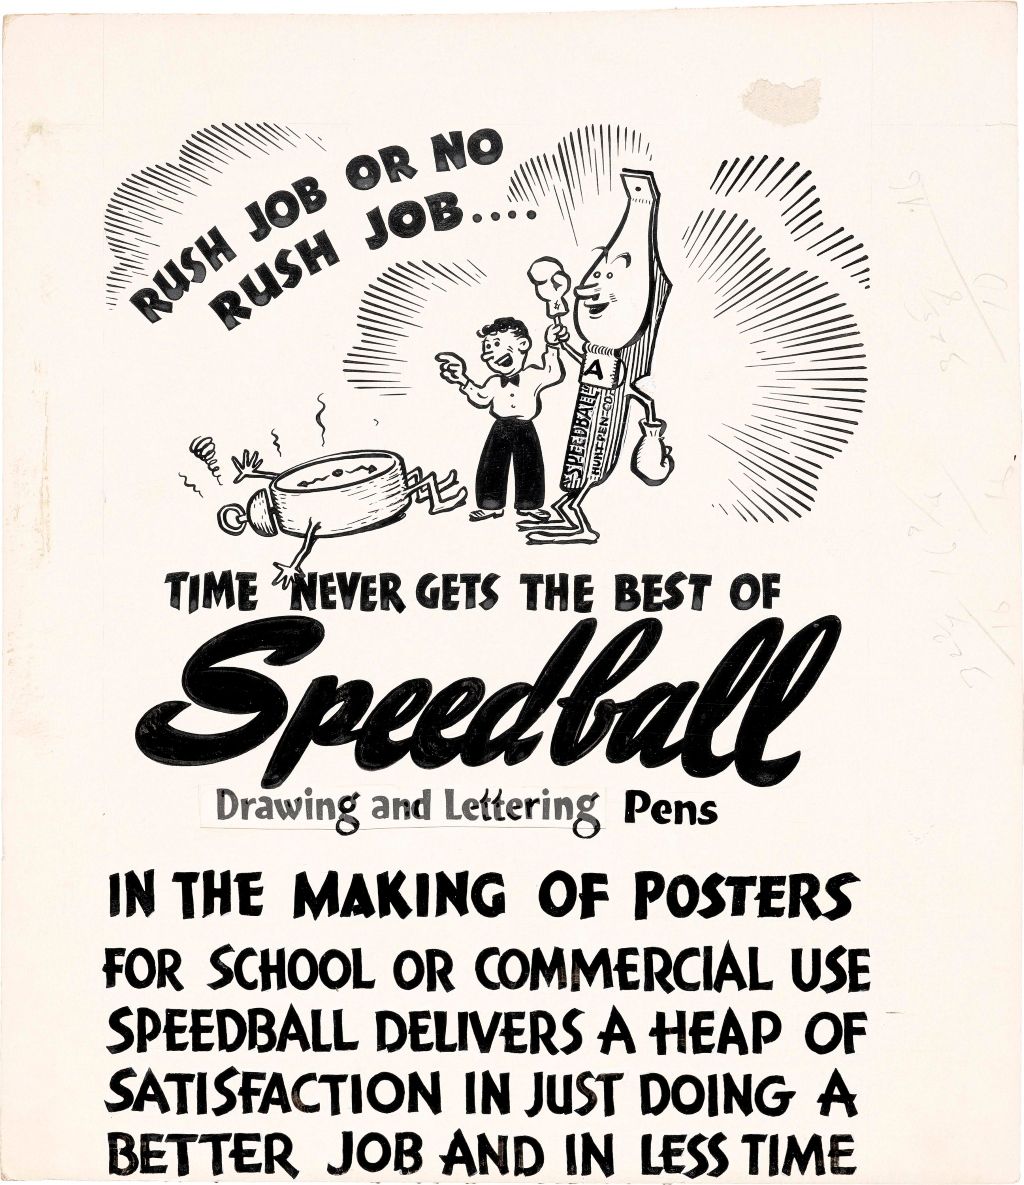 Ross F. George, ink on signboard drawing advertisement for Speedball drawing and lettering pens, ca. 1920.